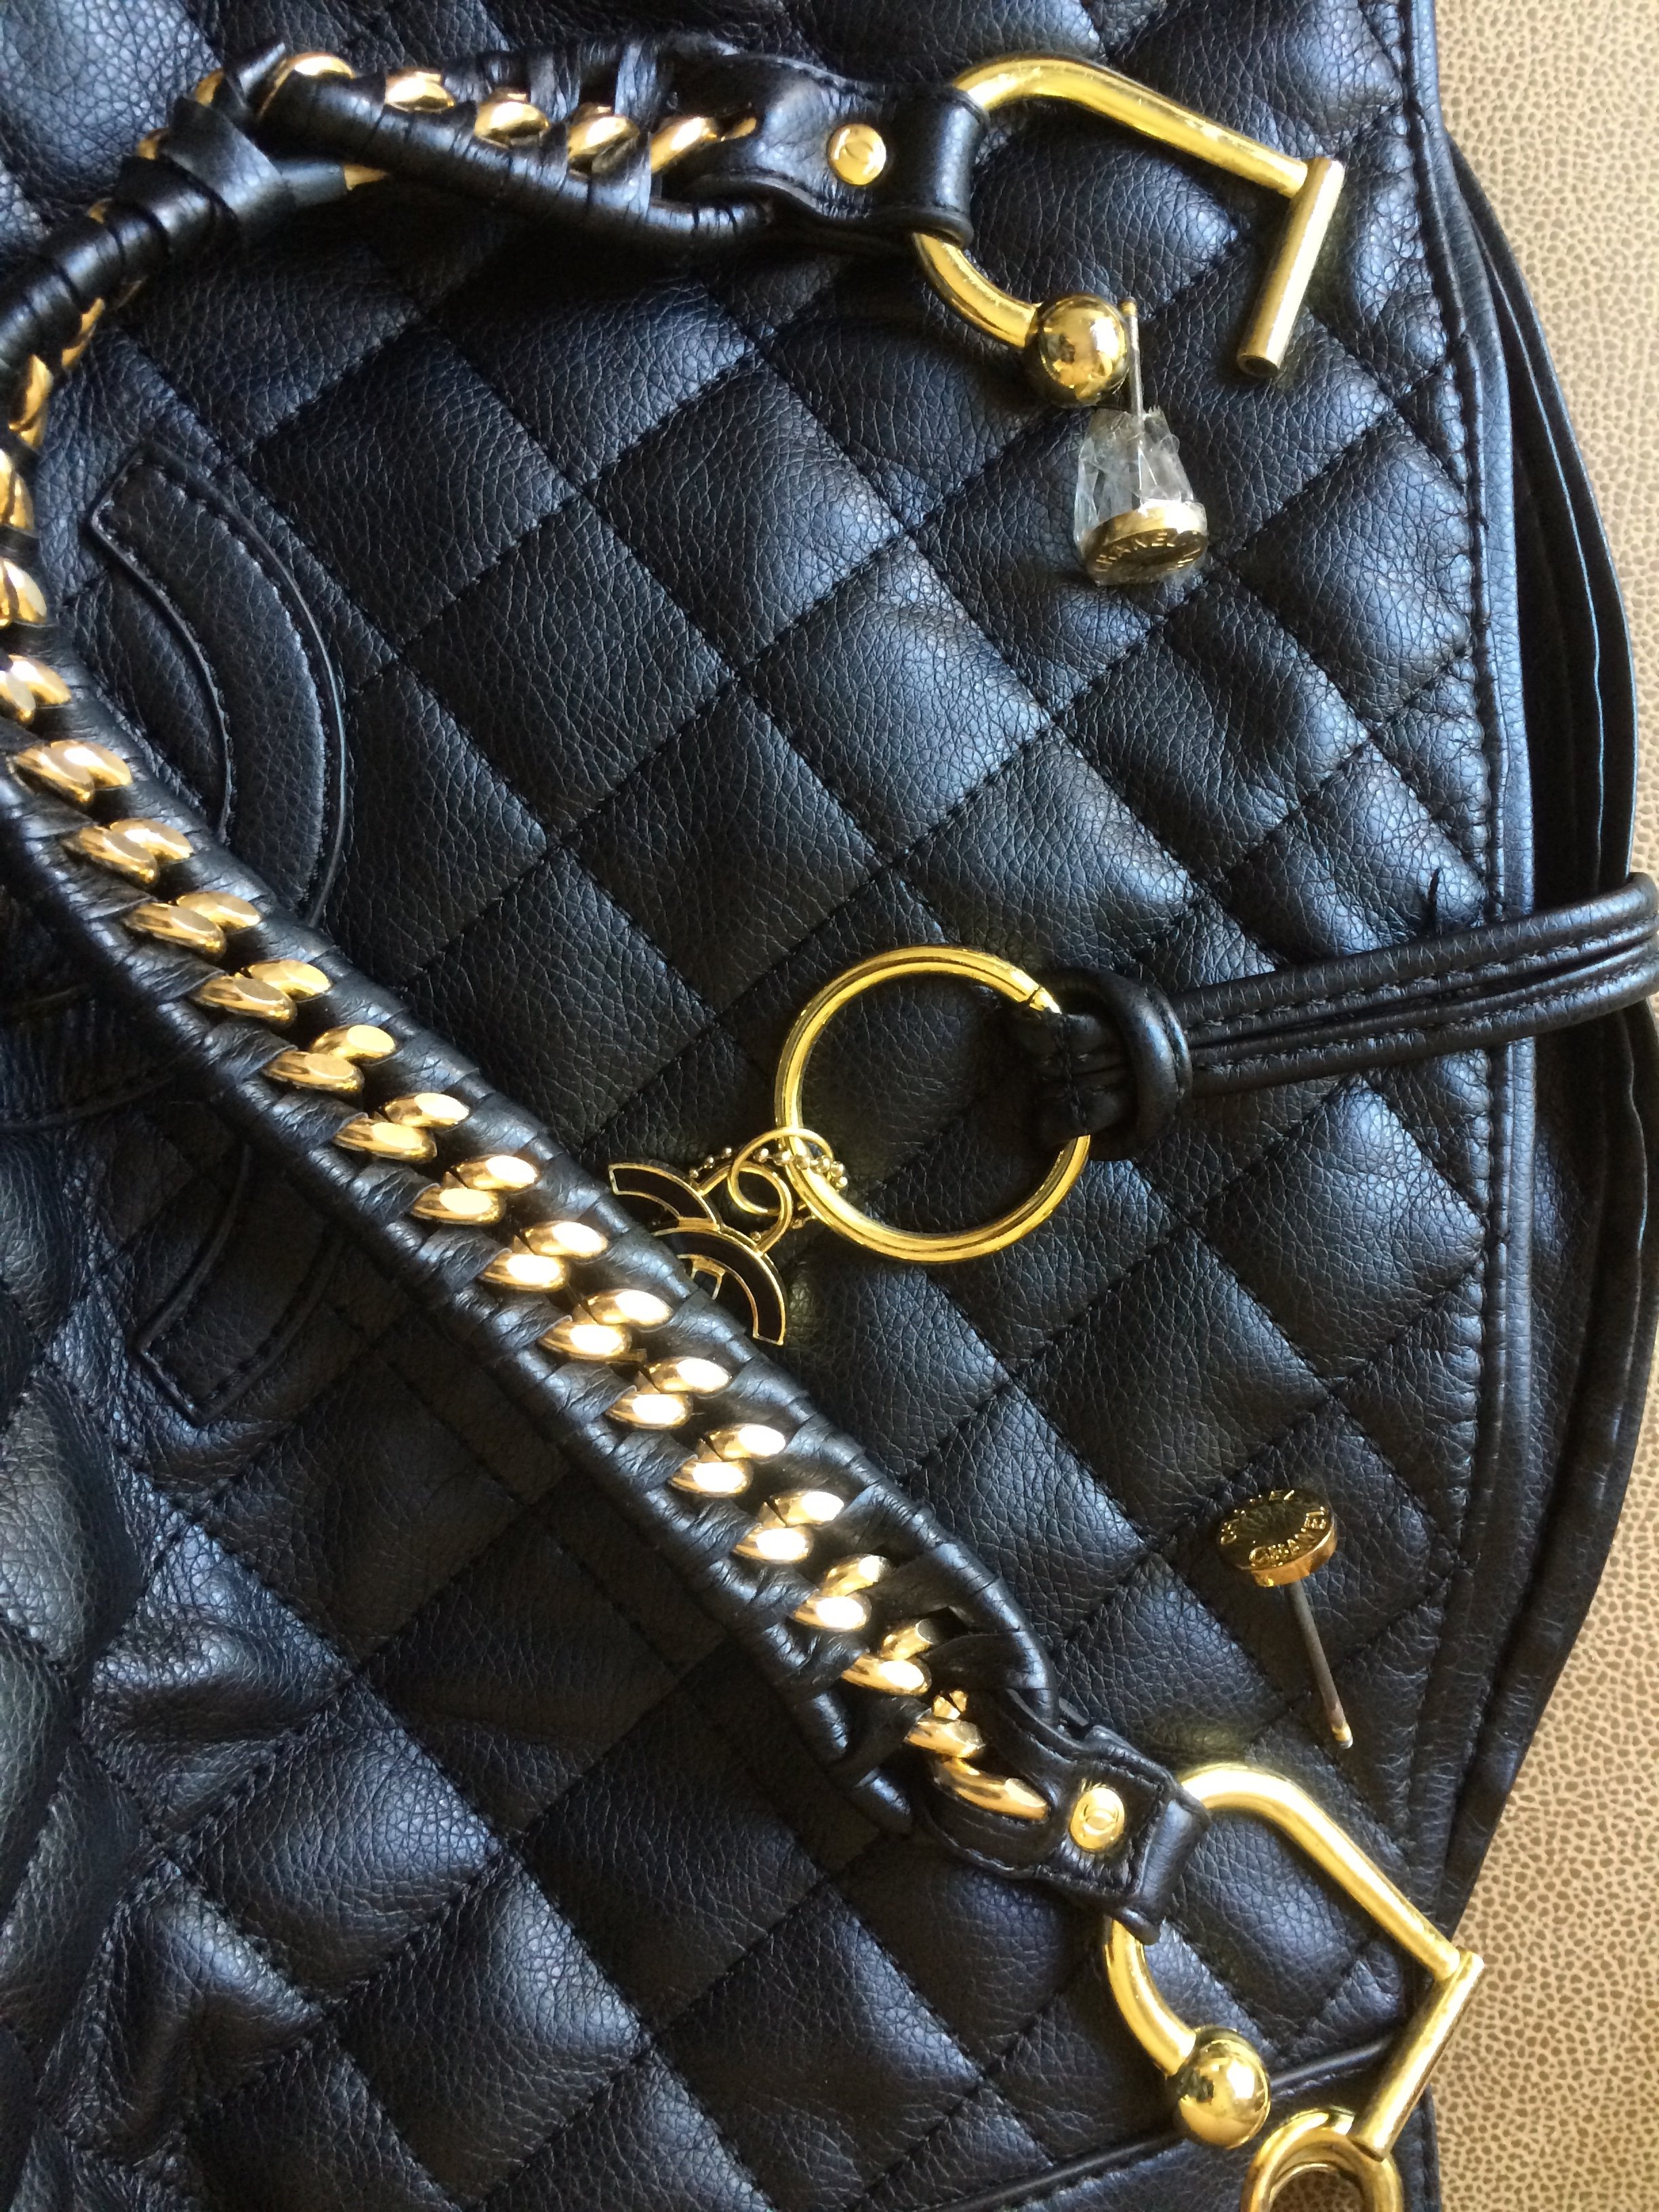 WARNING: DON'T BUY PATENT CHANEL BAGS! 🚫 (THE DAMAGE IS INSANE) 